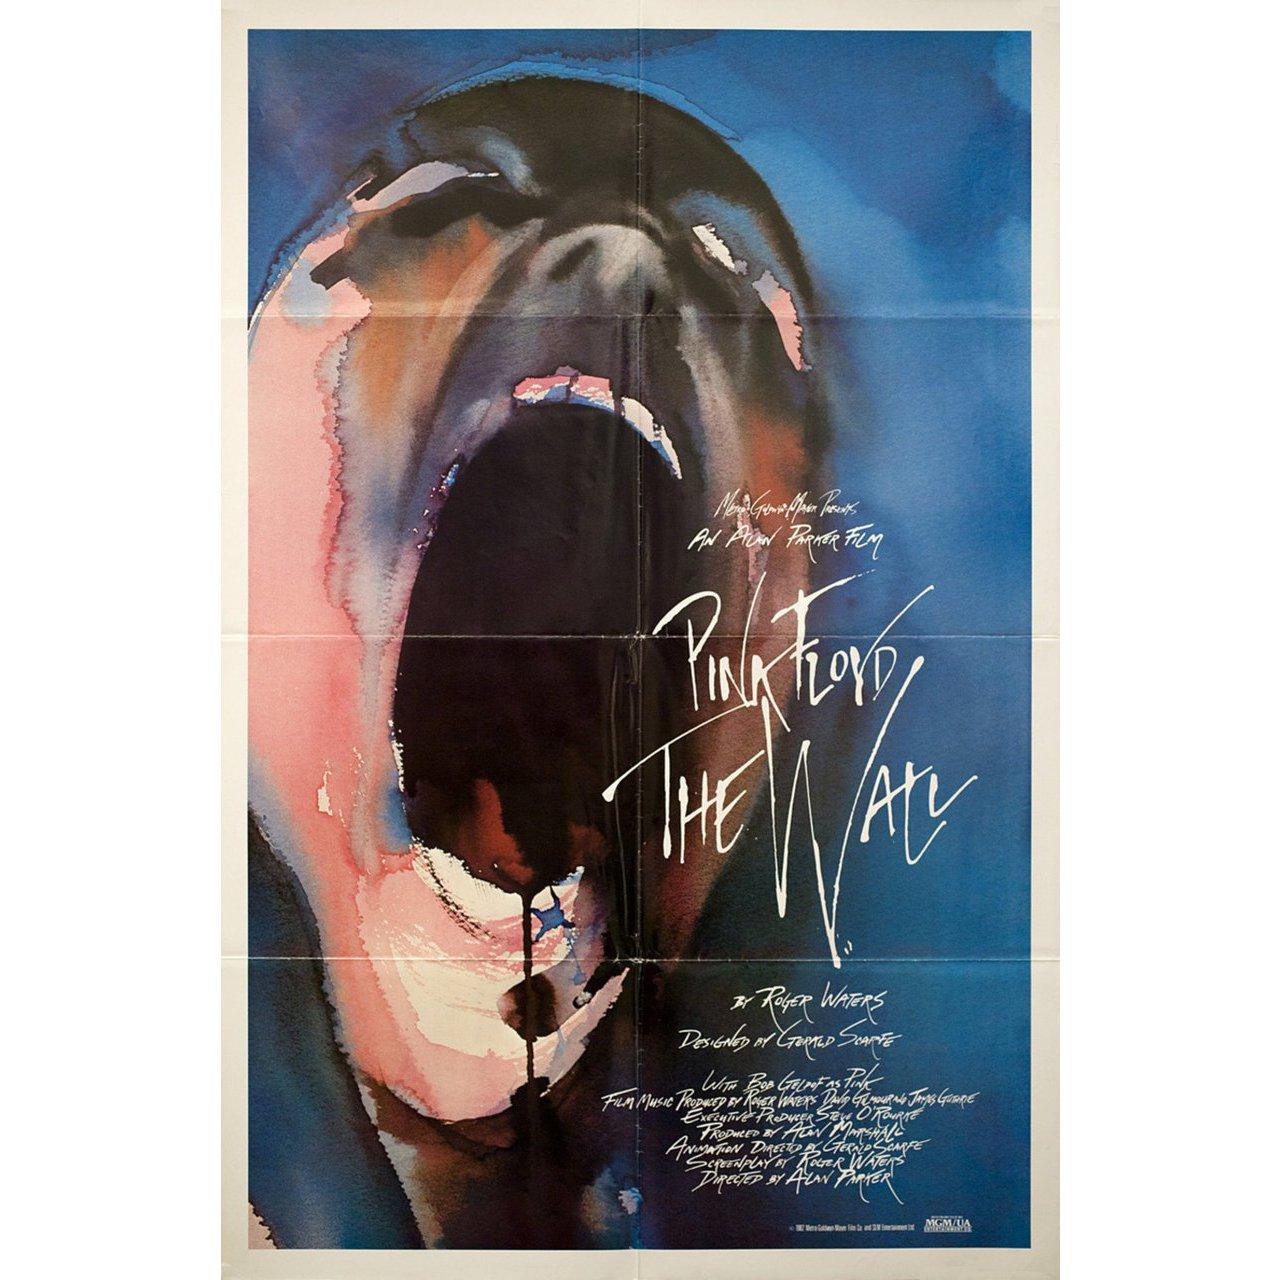 Original 1982 U.S. one sheet poster by Gerald Scarfe for the film Pink Floyd The Wall directed by Alan Parker with Bob Geldof / Christine Hargreaves / James Laurenson / Eleanor David. Fine condition, folded. Many original posters were issued folded